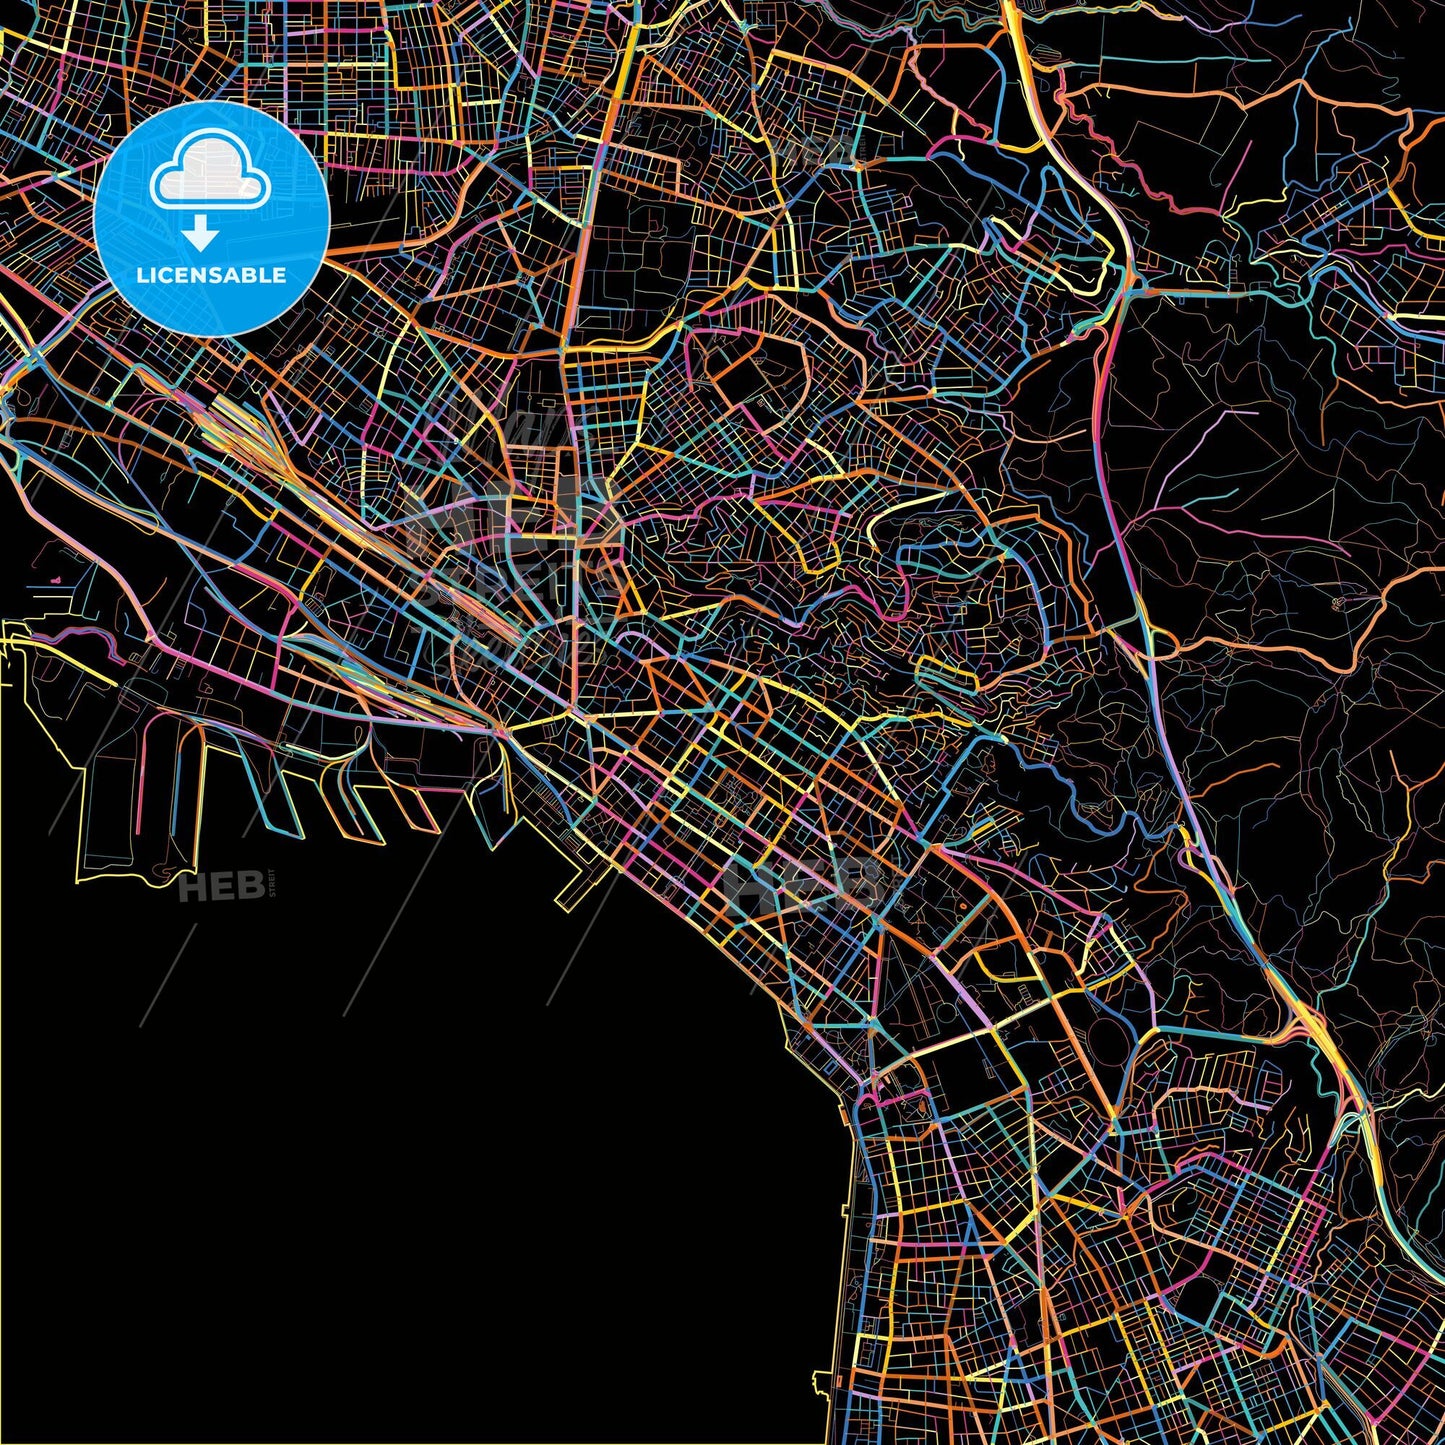  Thessaloniki, Central Macedonia, Greece, colorful city map on black background